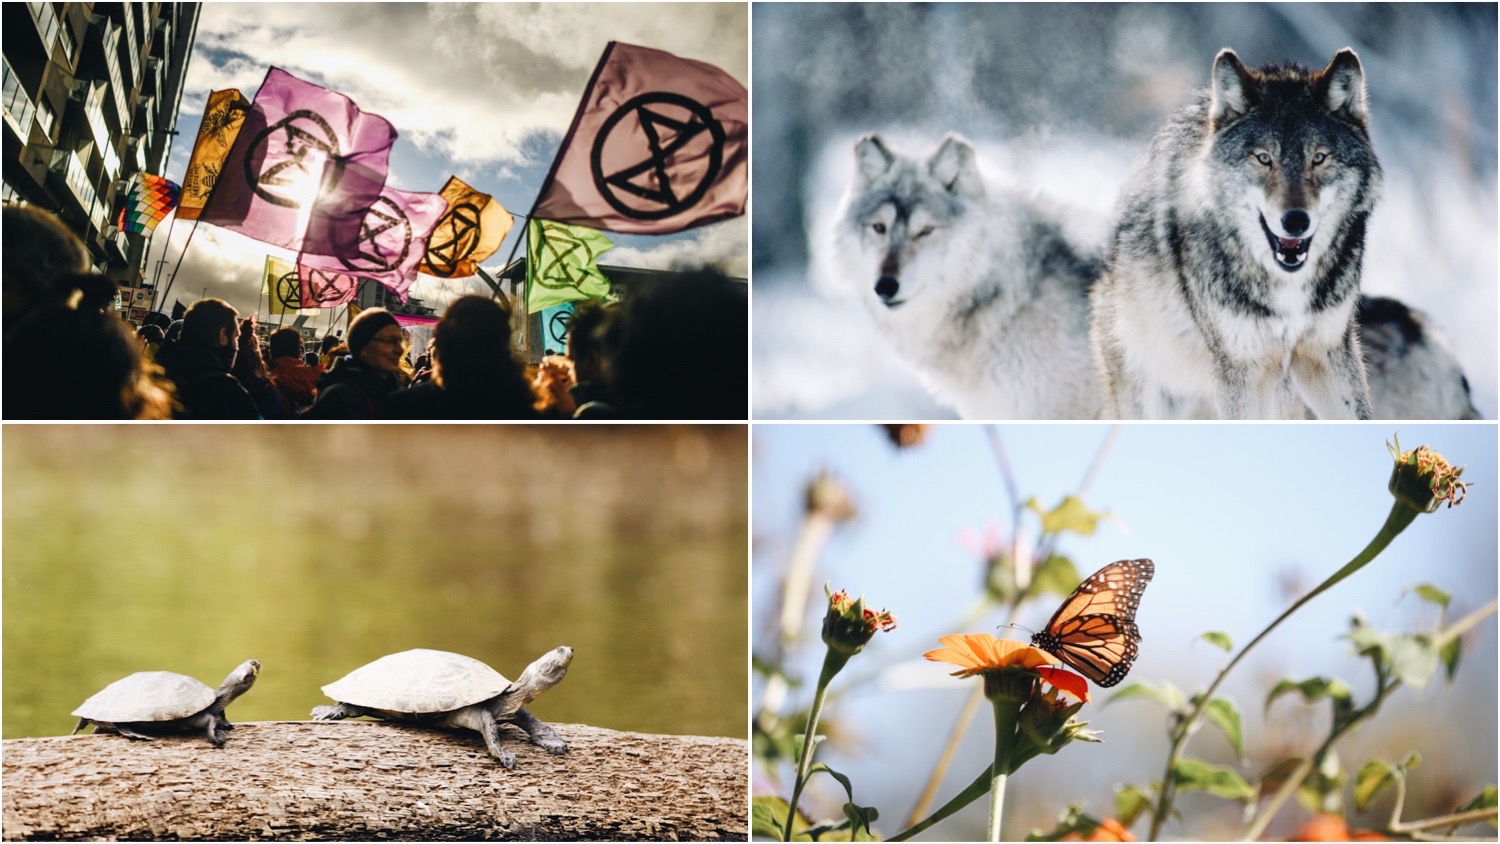 Clockwise from top left, Extinction Rebellion protesters wave banners featuring the group's hourglass logo, a grey wolf huddles in the snow, two endangered river turtles sit on a log, and monarch butterflies sit alight on wildflowers.